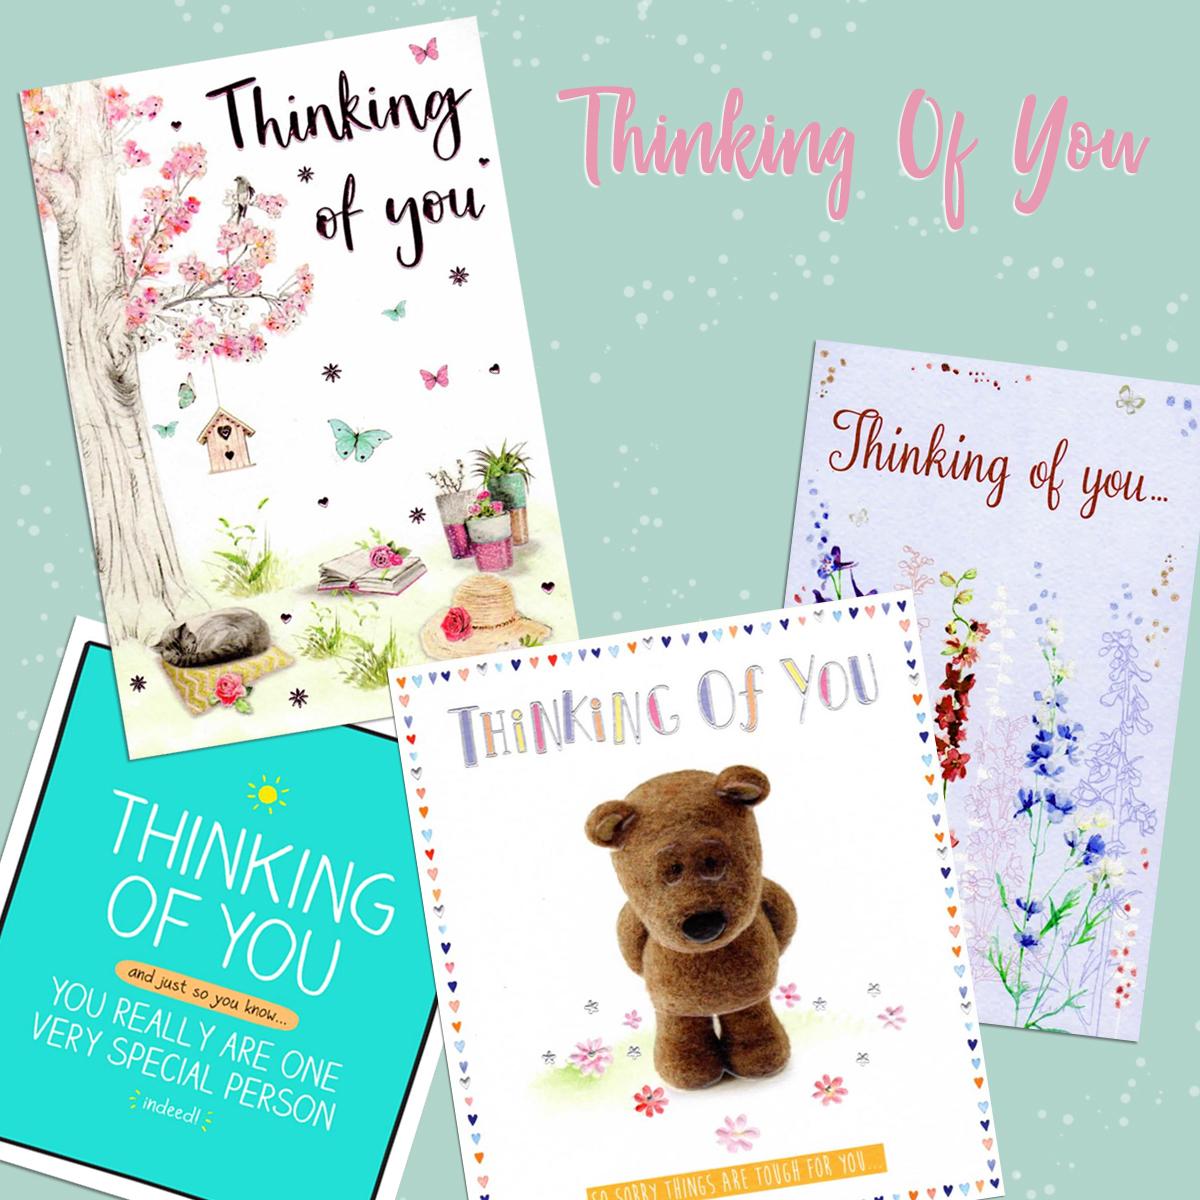 A Selection Of Cards To Show The Depth Of Range In Our Thinking Of You Card Section